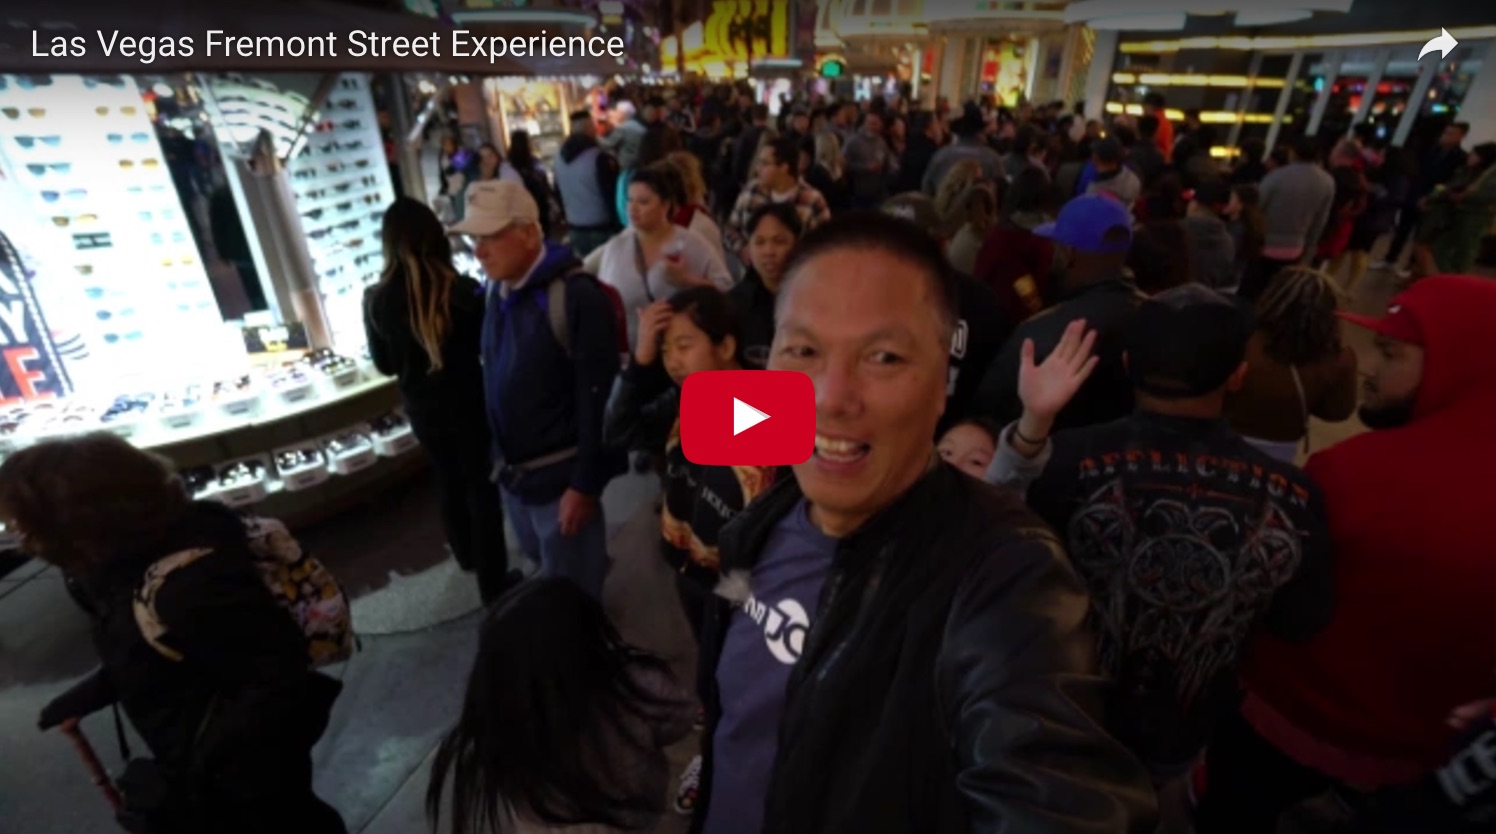 Experiencing The Las Vegas Fremont Street Experience